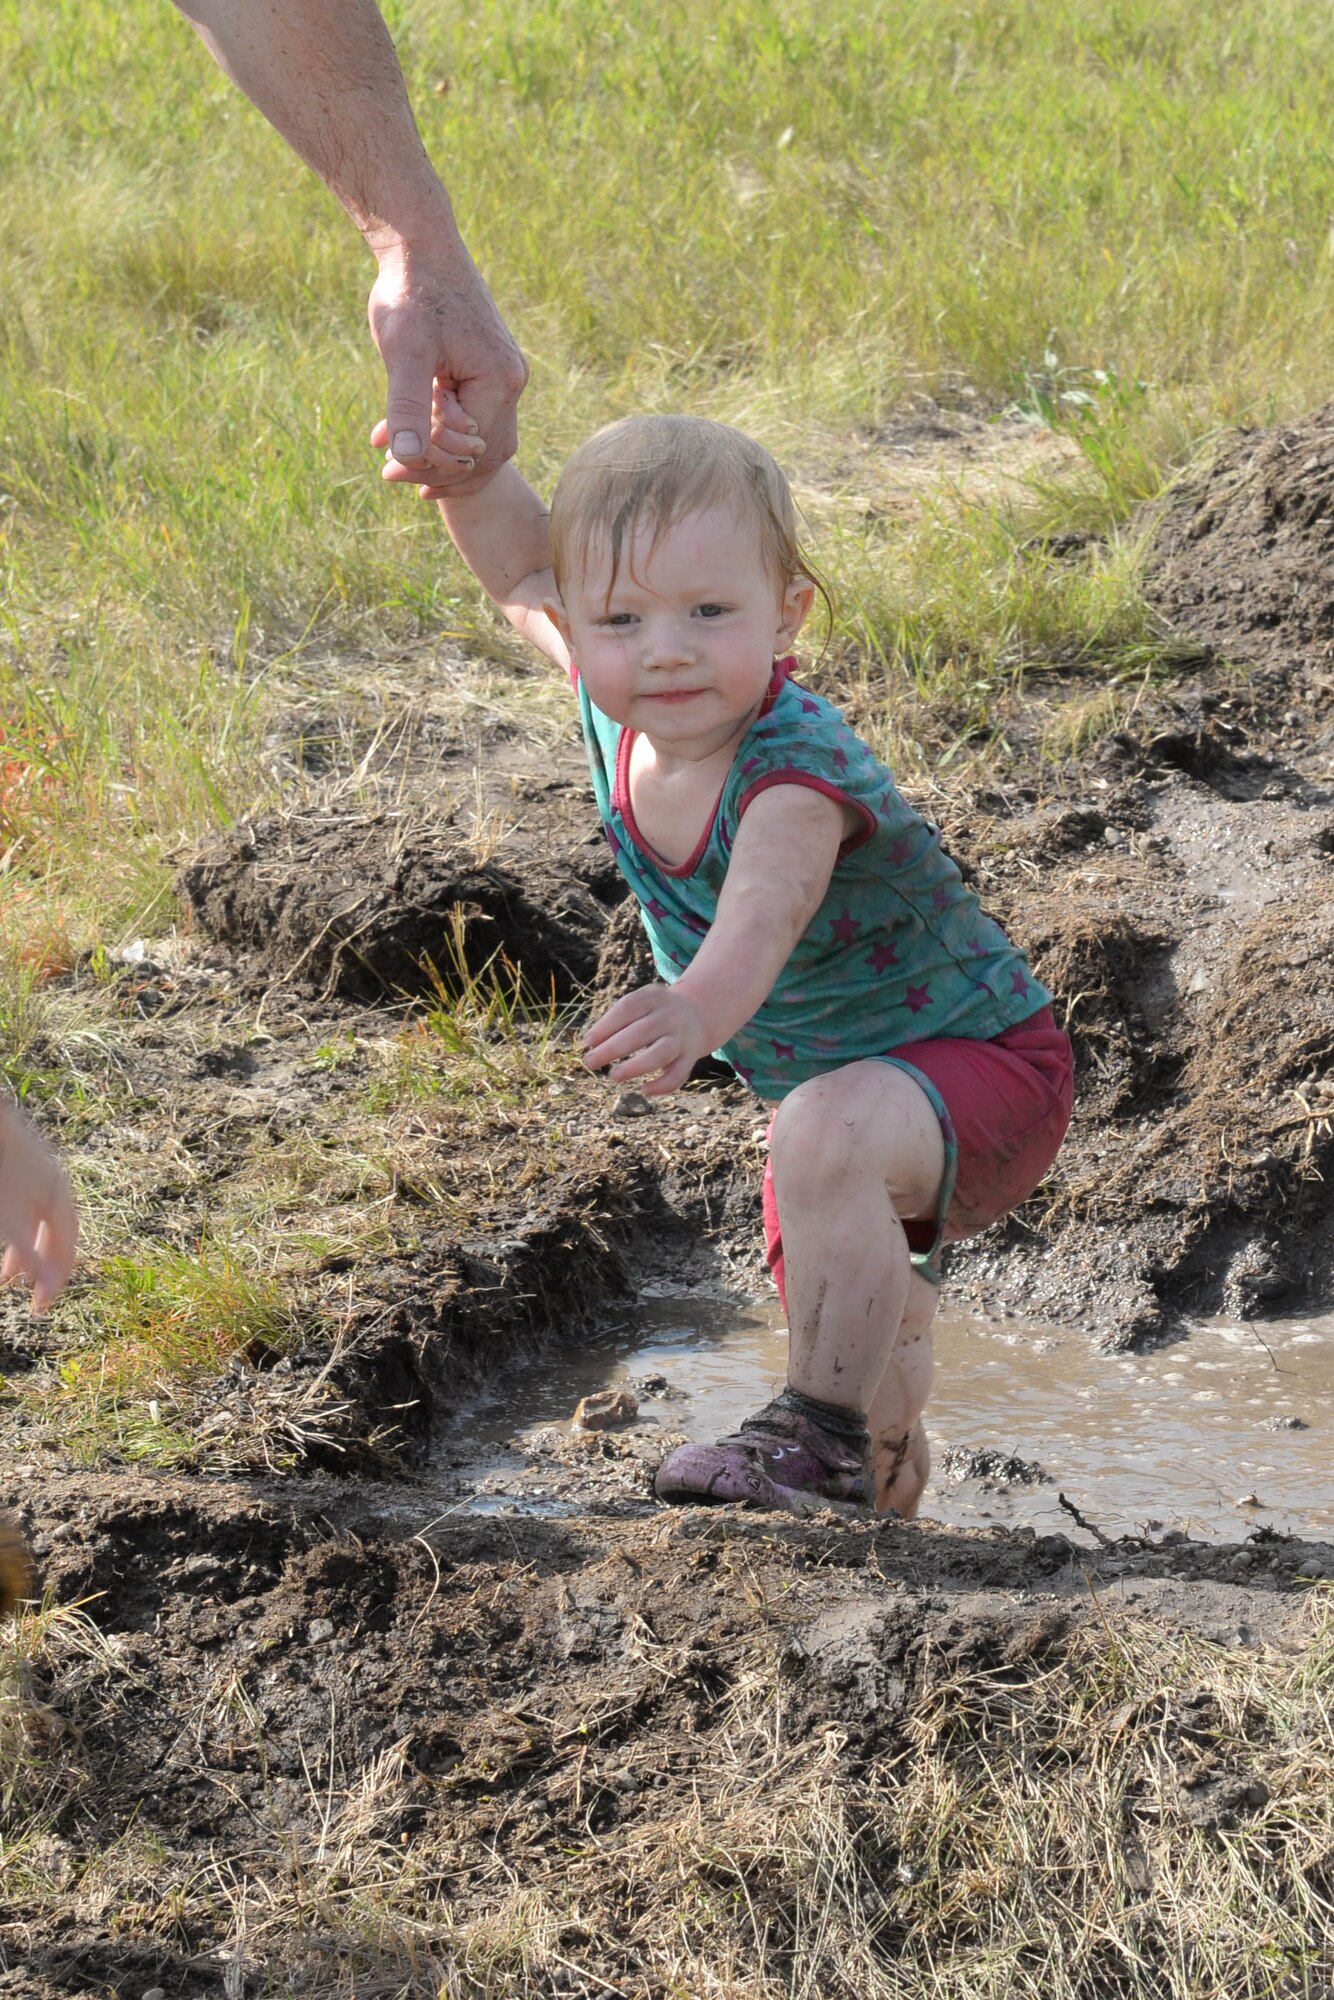 The 5th Force Support Squadron hosted the 2016 Mini Mudder at Minot Air Force Base, N.D., July 15, 2016. The race consisted of different obstacles that challenged Airmen and their families to crawl, climb, run and slide through mud and water. Approximately 900 Airmen and their families attend the event, which lasted 2 hours. (U.S. Air Force photo/Airman 1st Class Jessica Weissman) 